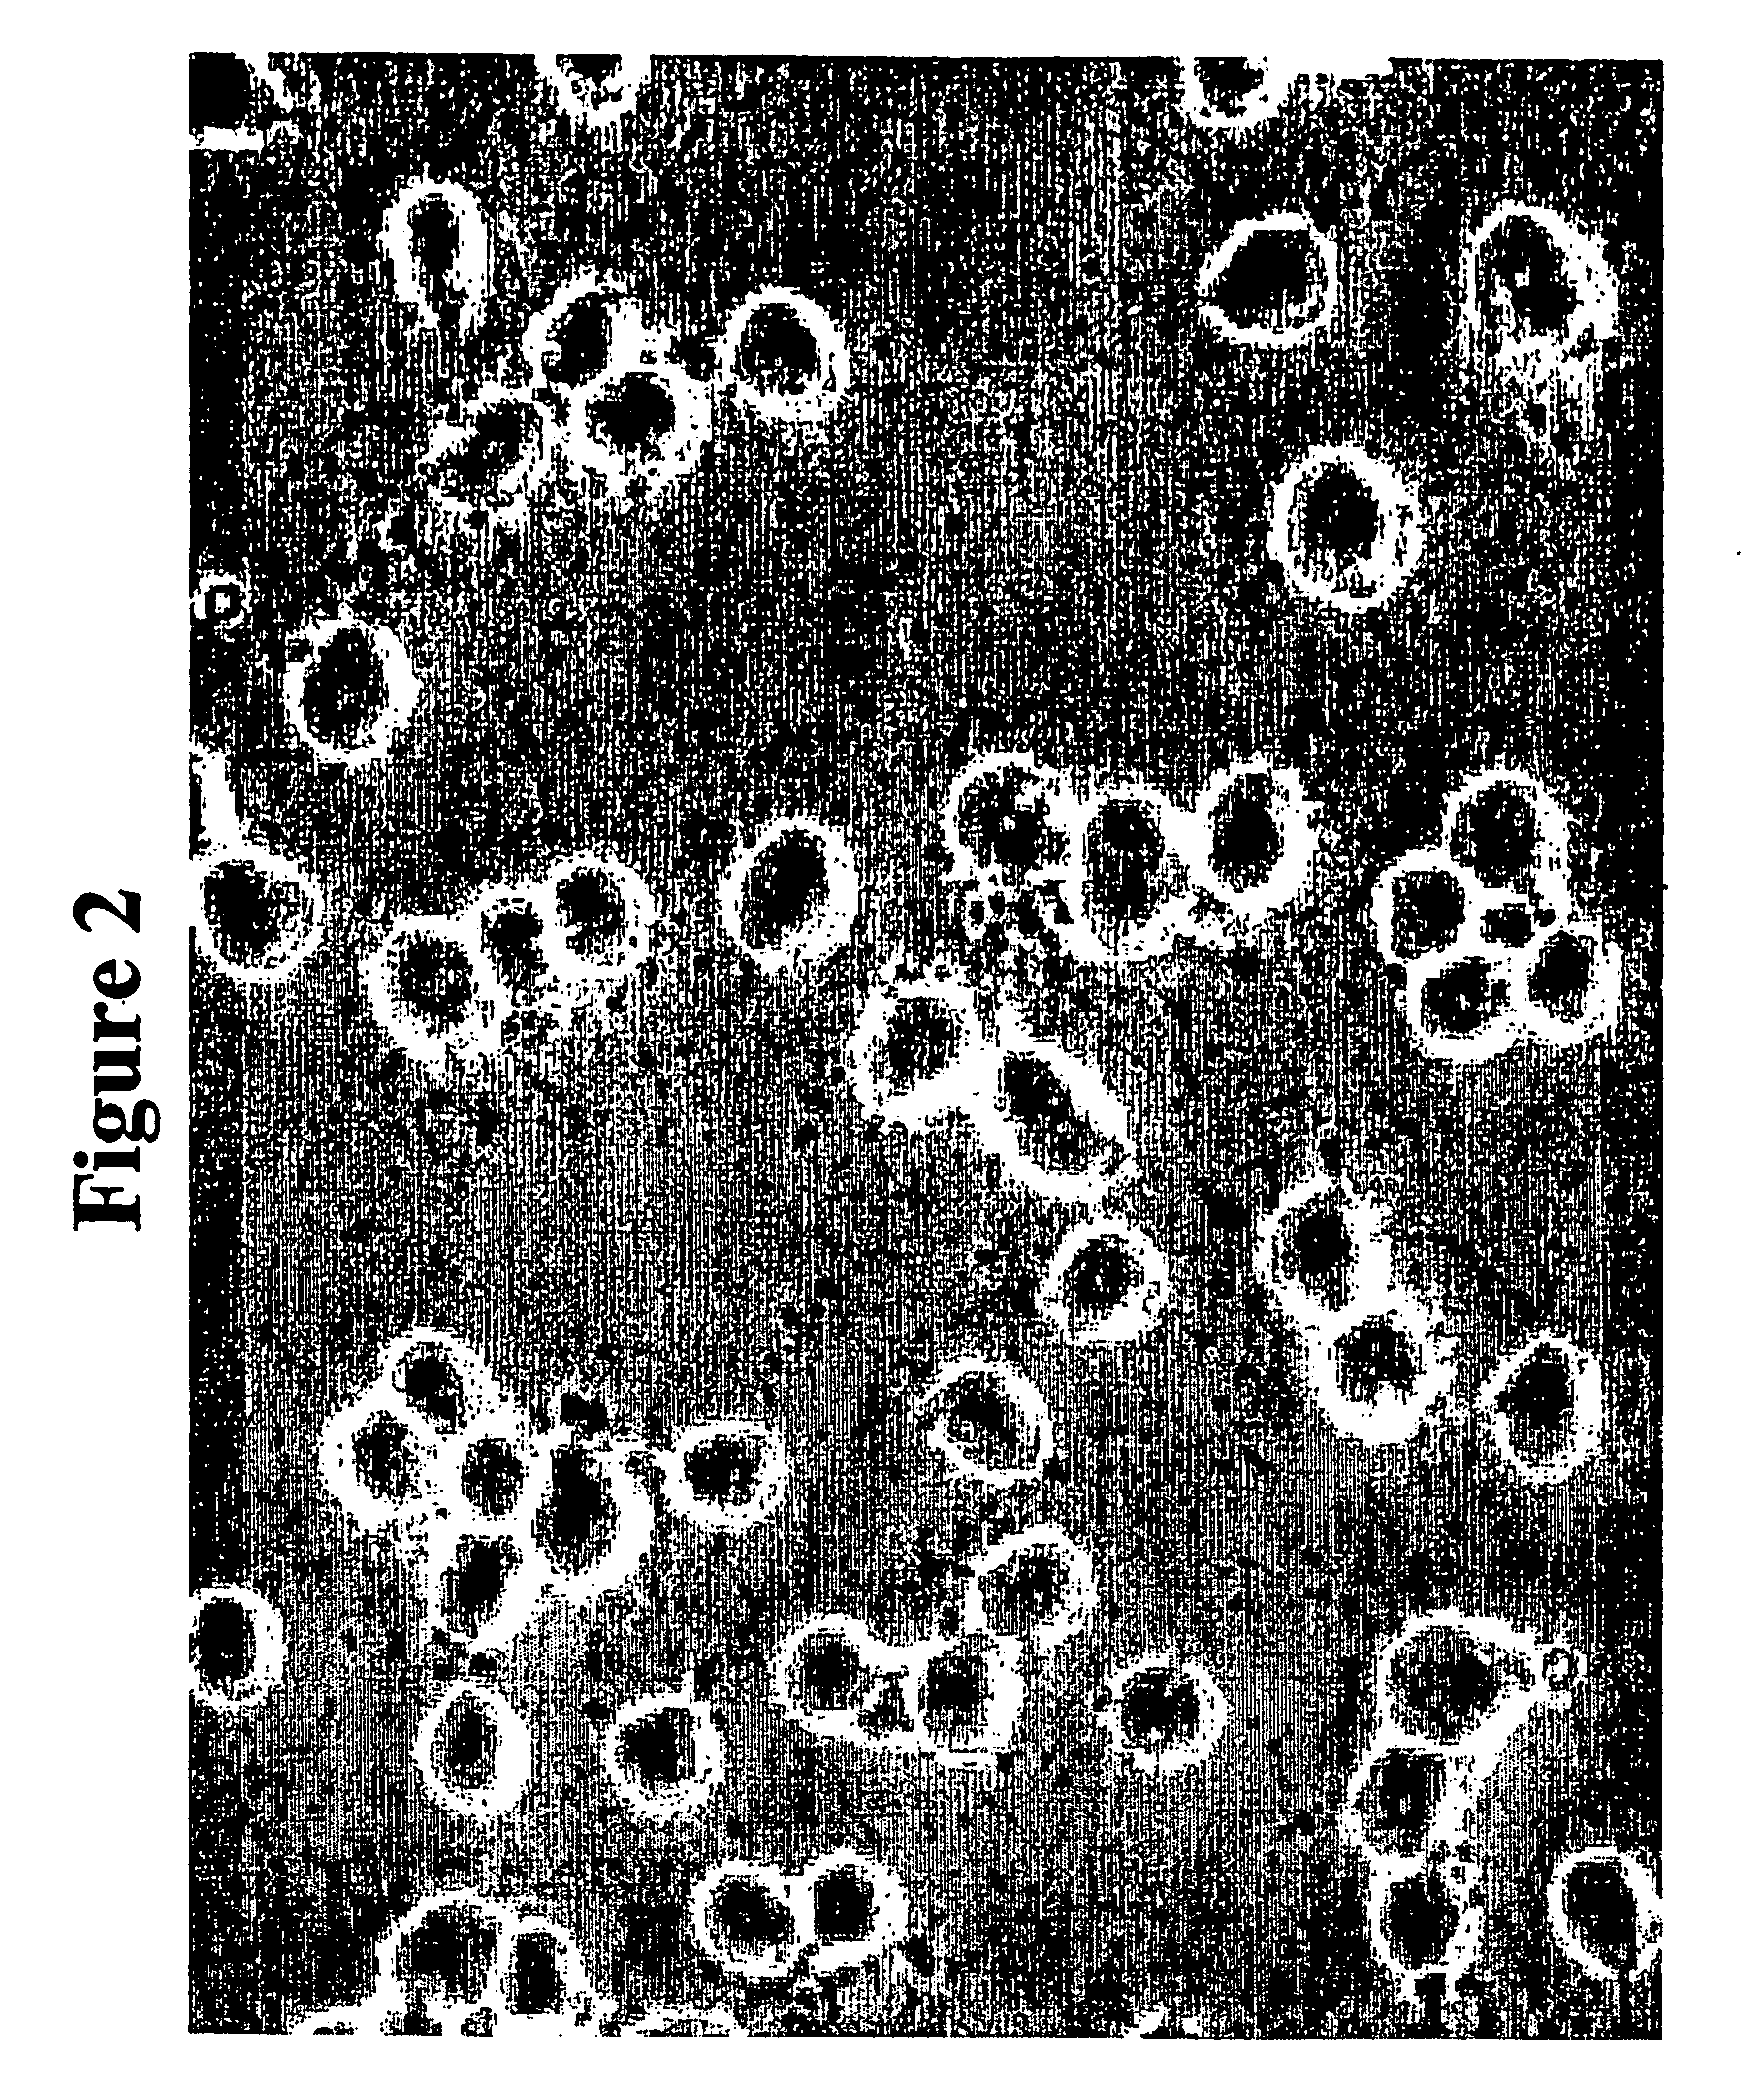 Oligodendrocyte precursor cells and method of obtaining and culturing the same